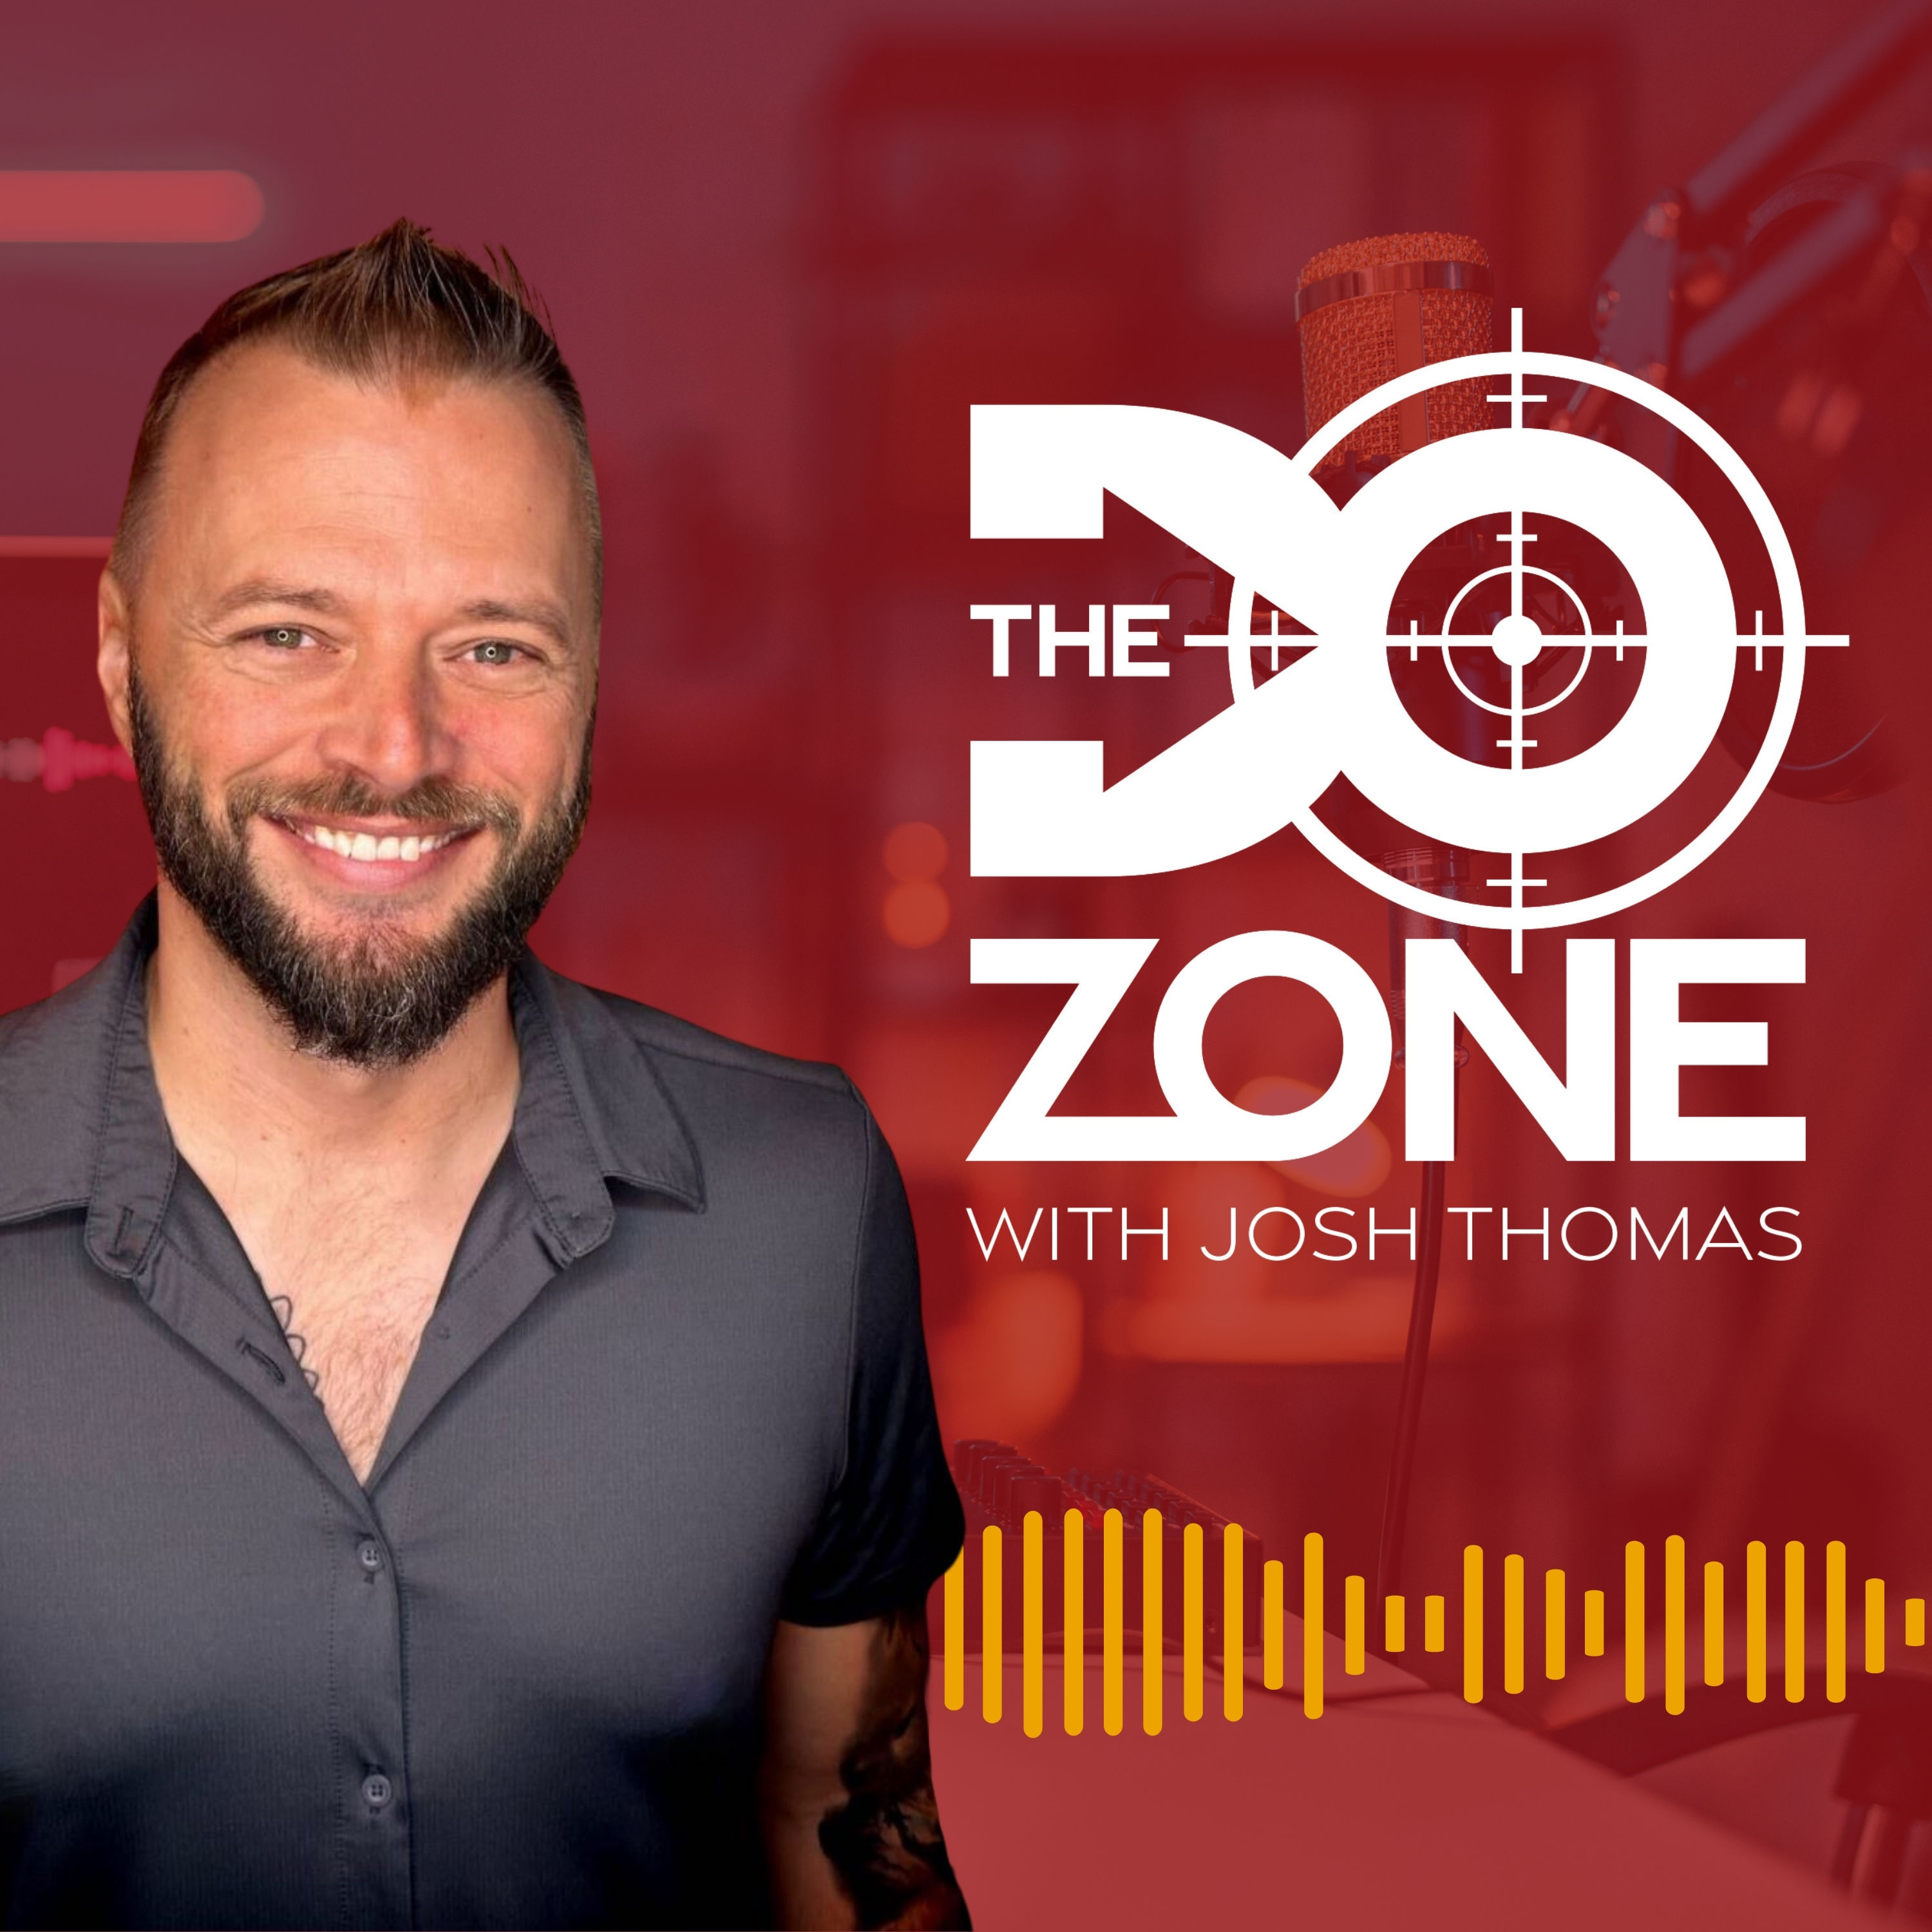 Finding The Perfect Audience with John Kozma